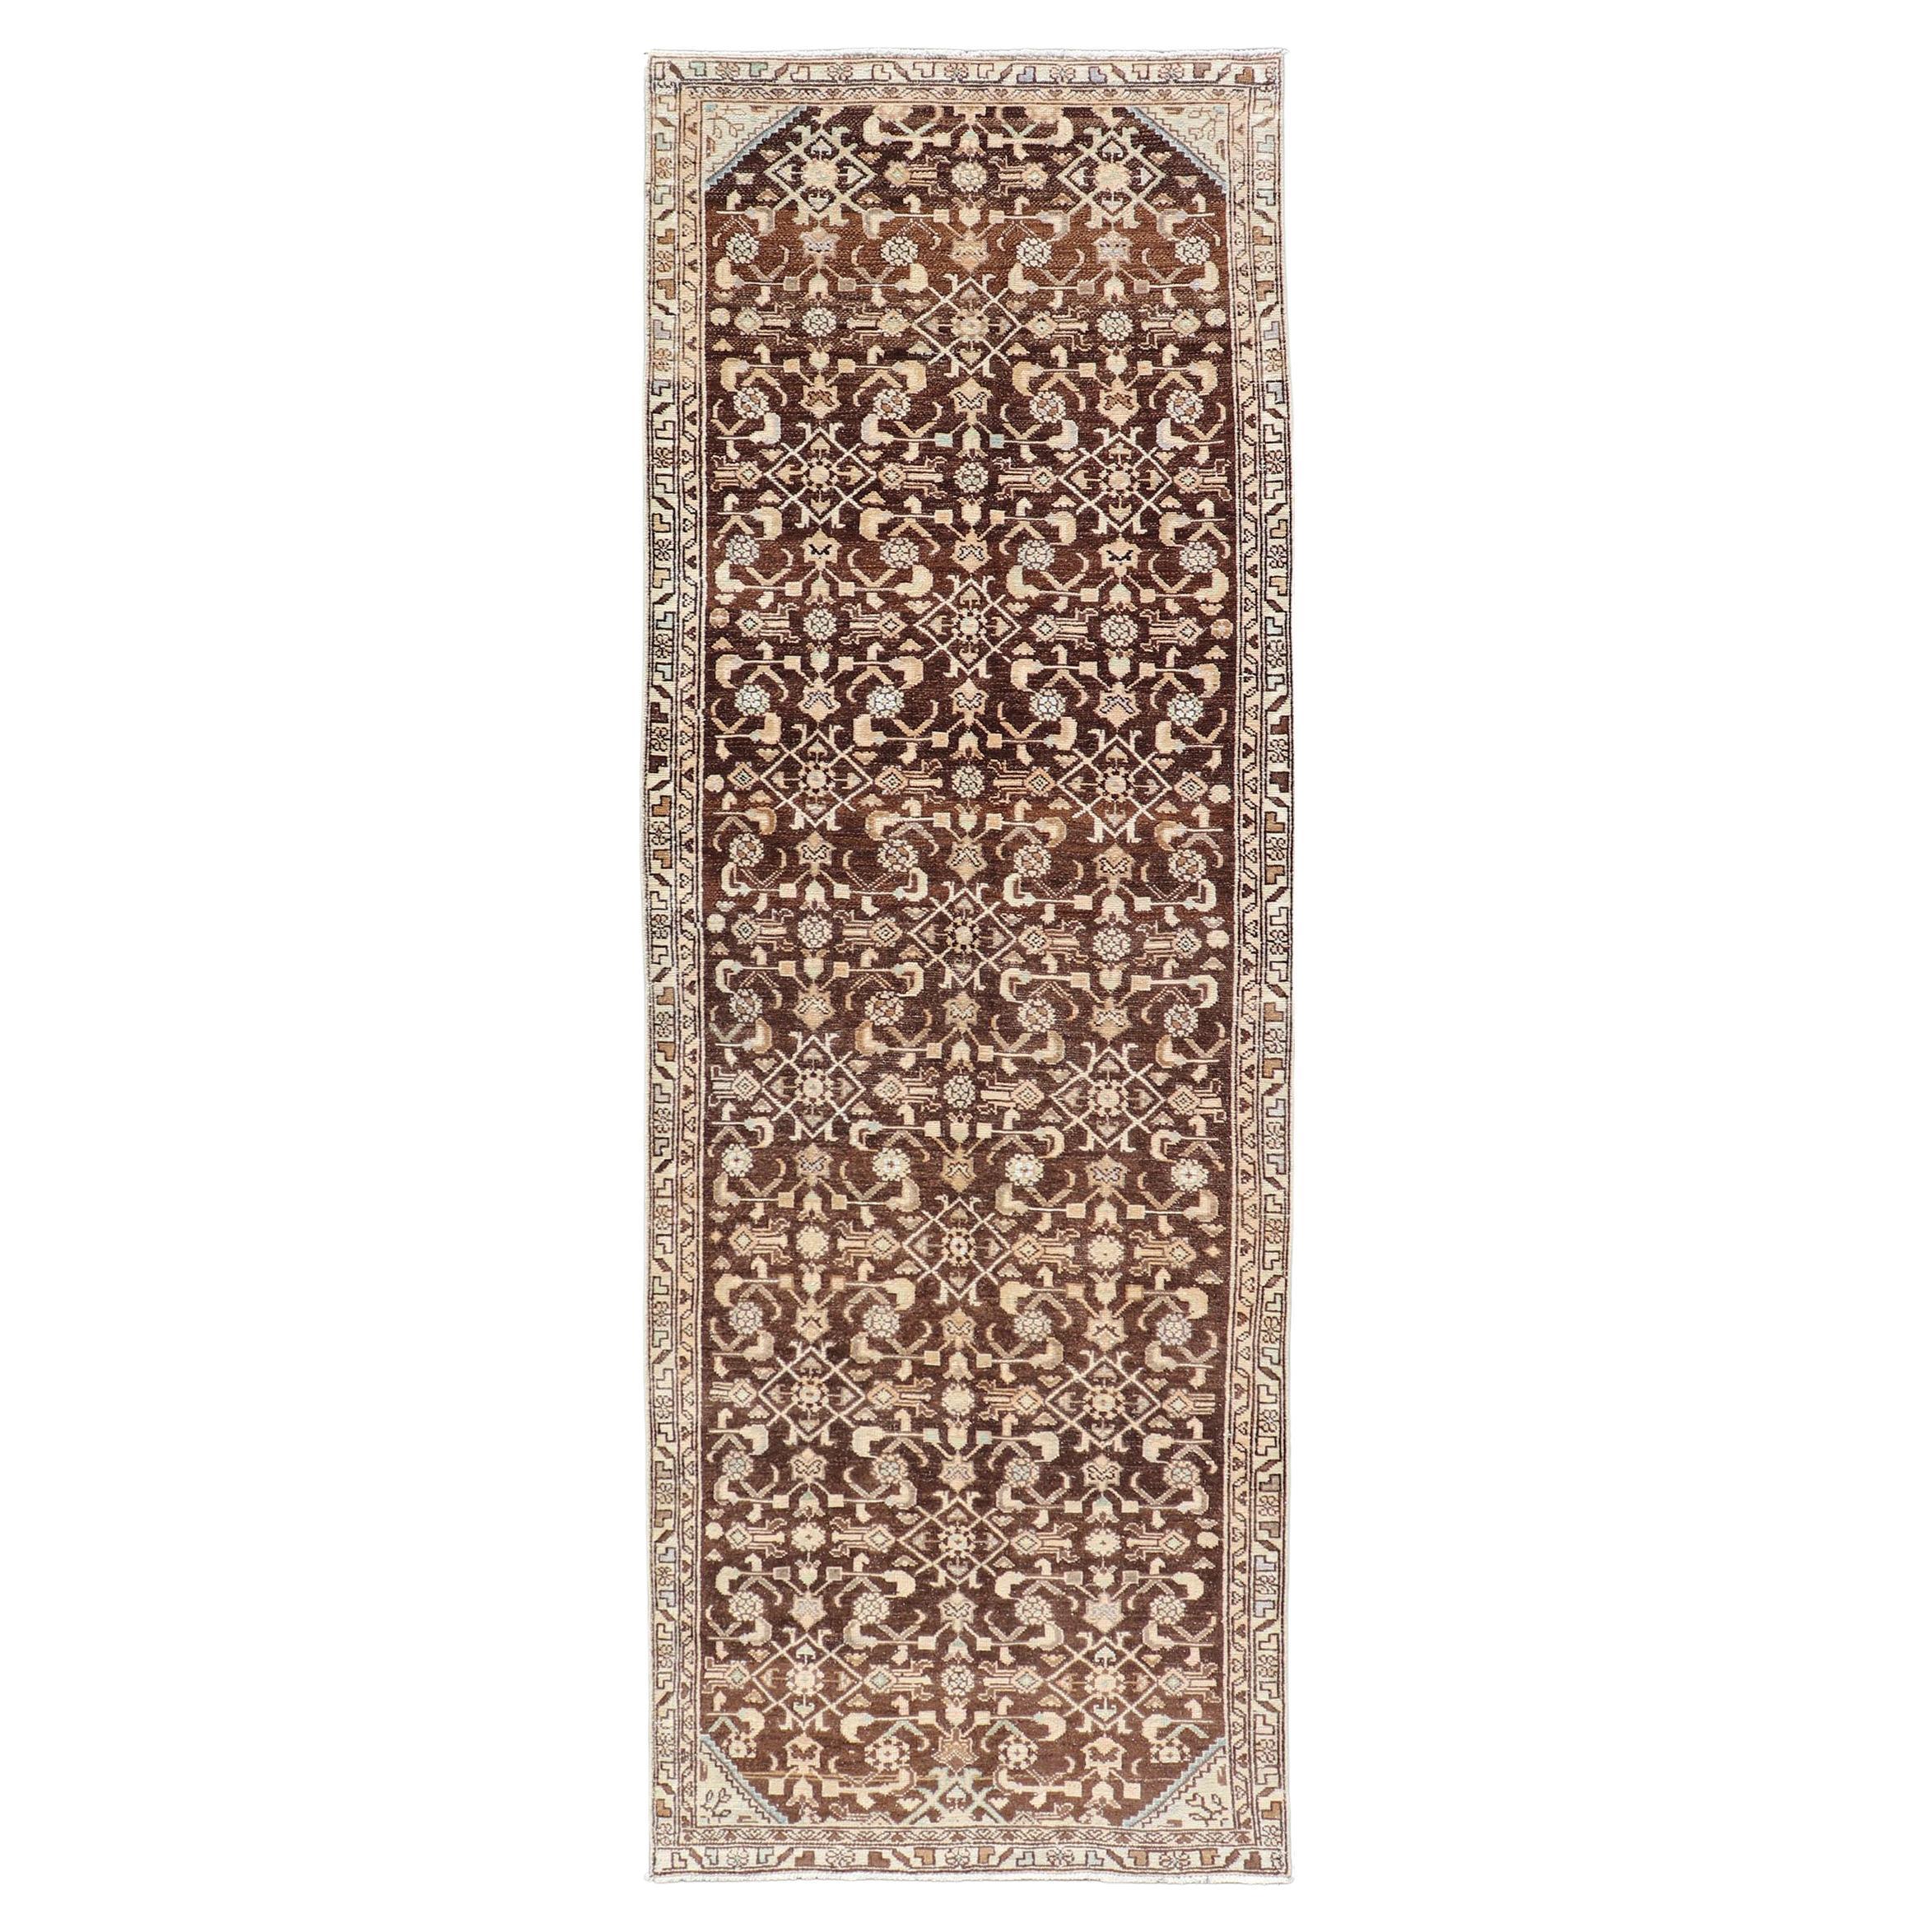 Vintage Persian Mahal Runner with All-Over Herati Design in Brown